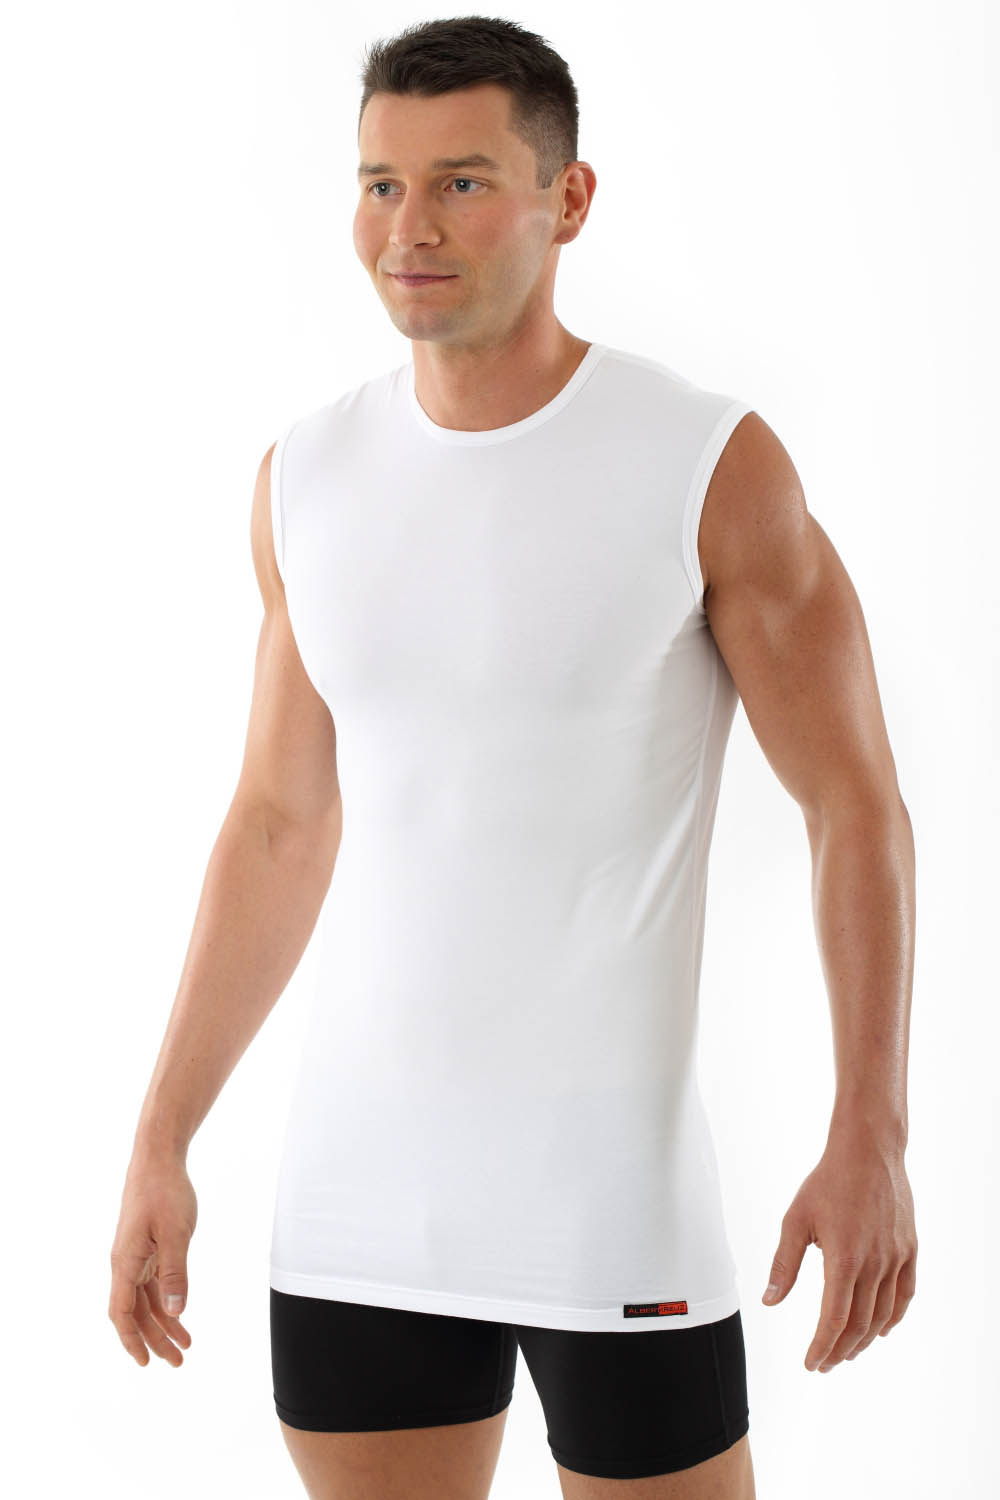 A++ Slimming Tank Top Mens Elastic, Tight, And Slimming Sports